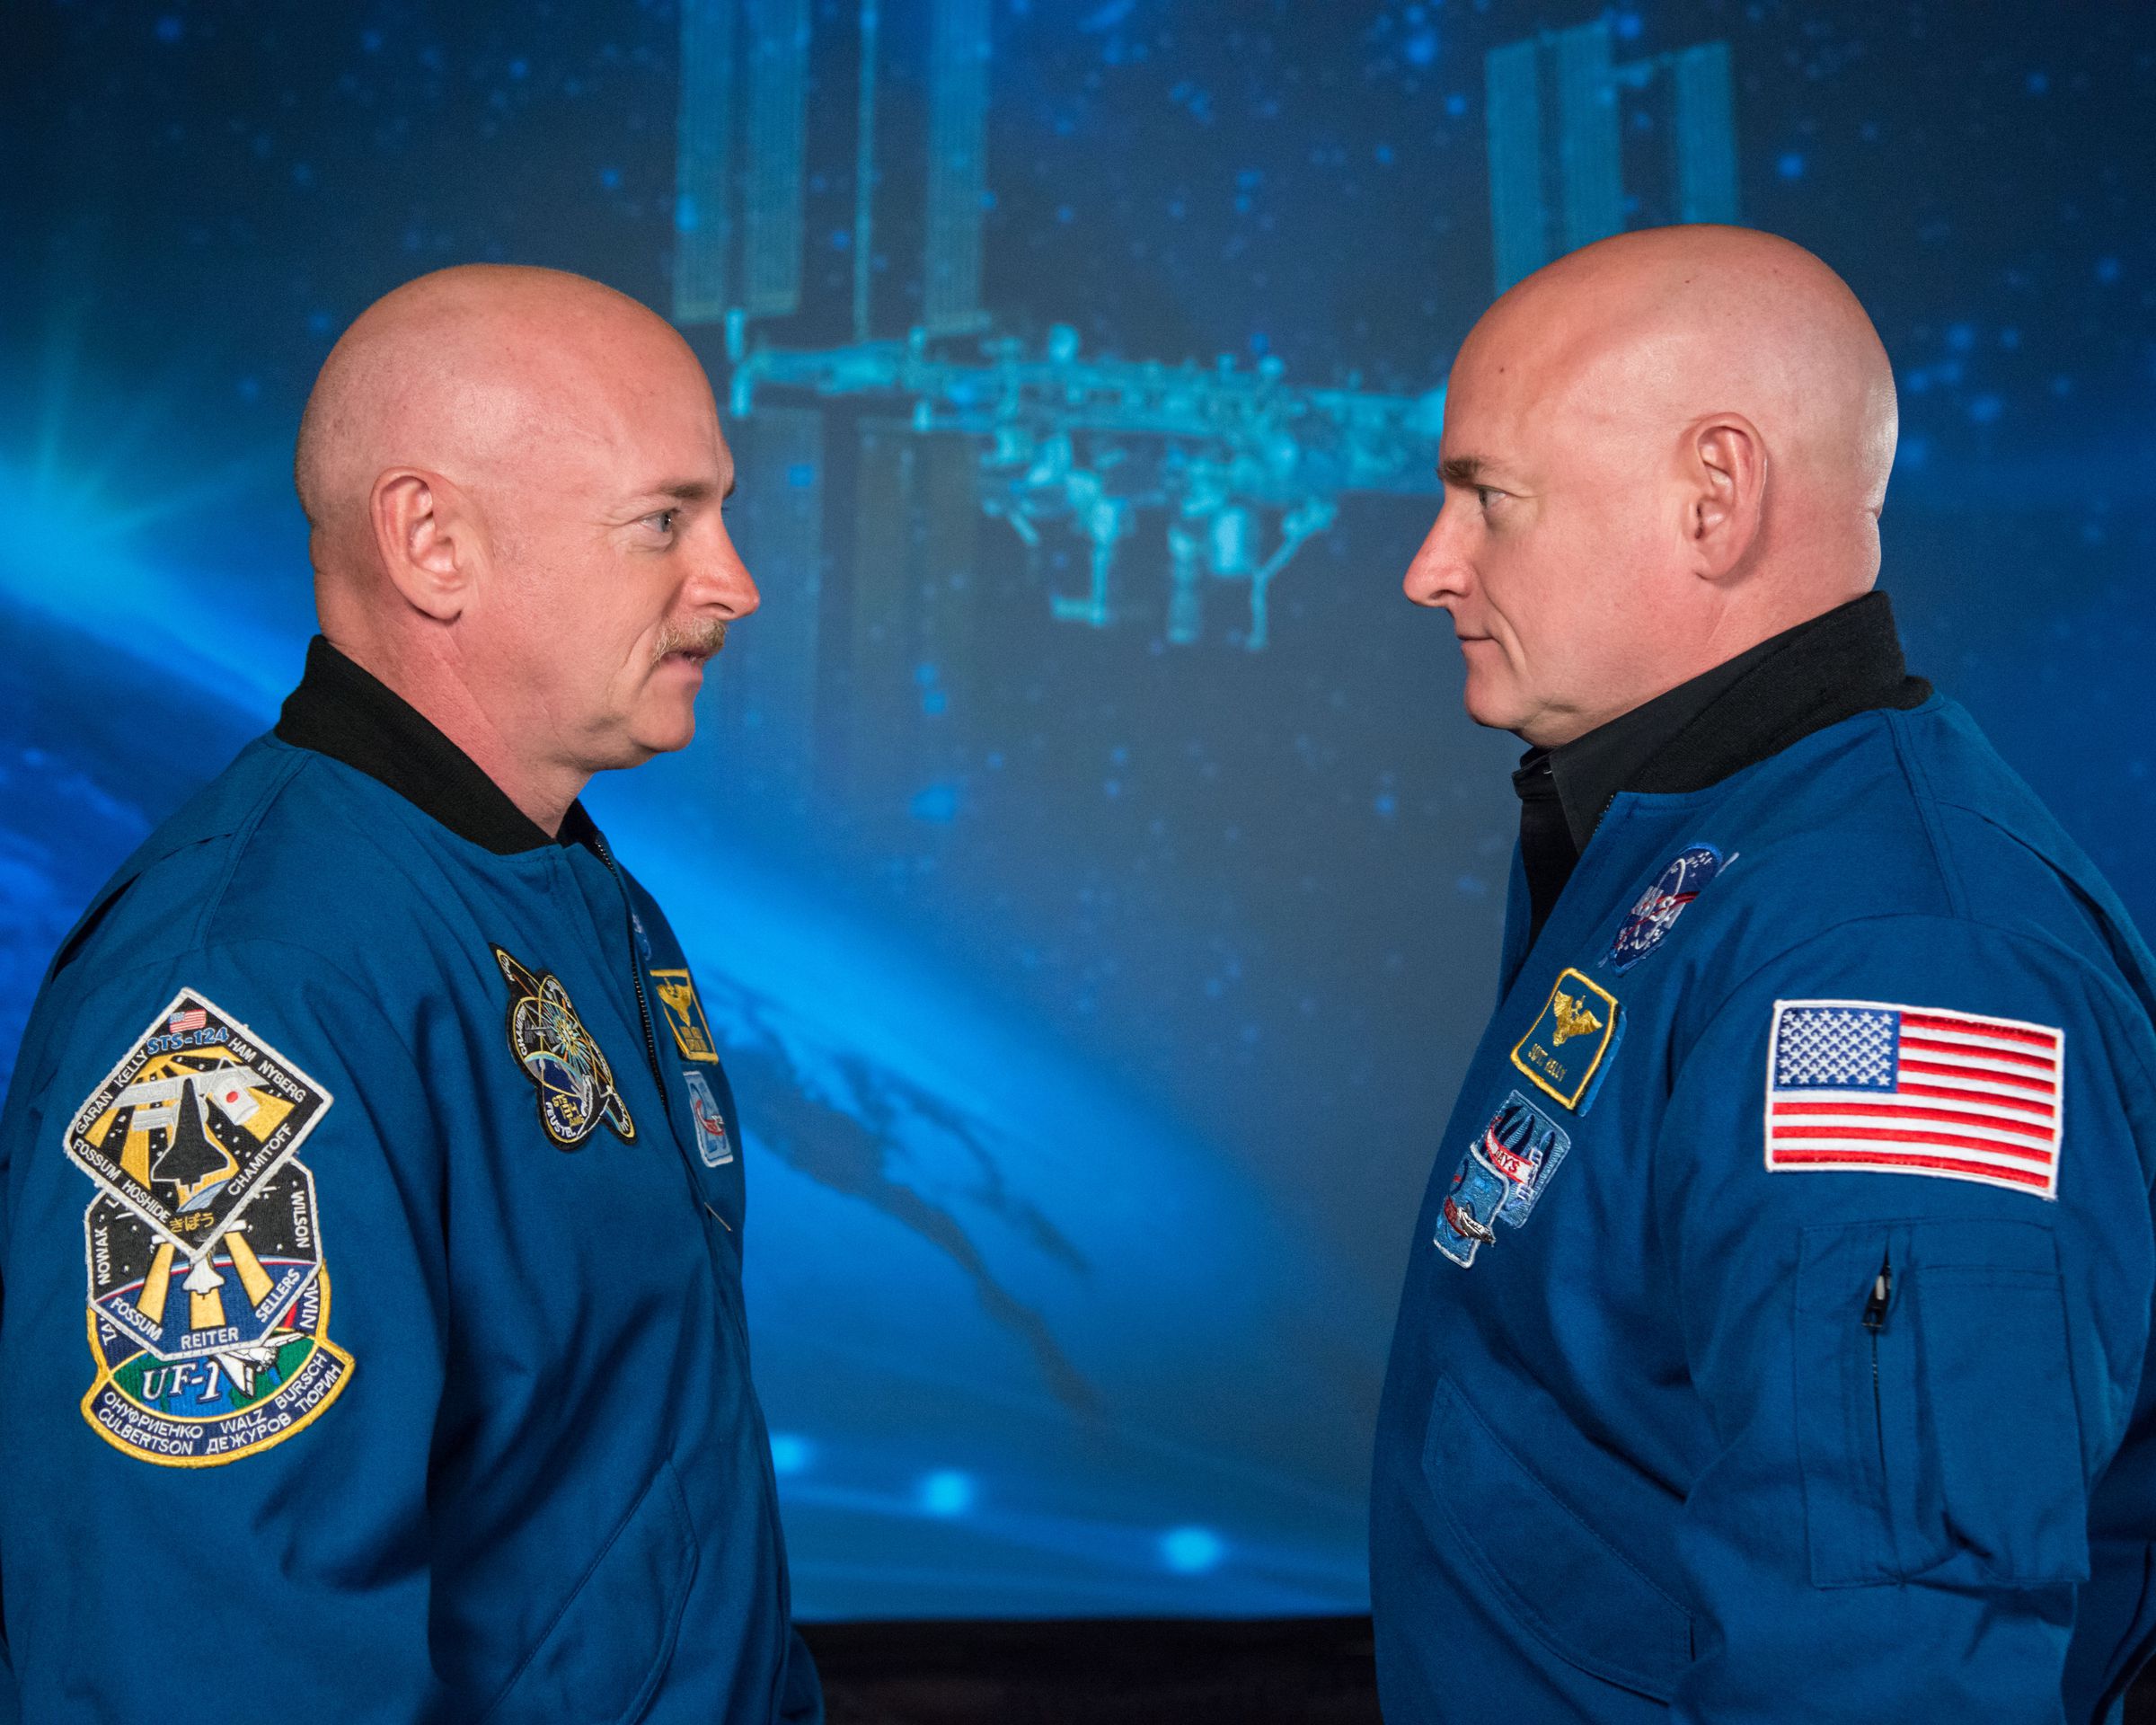 Mark (L) and Scott (R) Kelly, posing for NASA’s Twin Study.